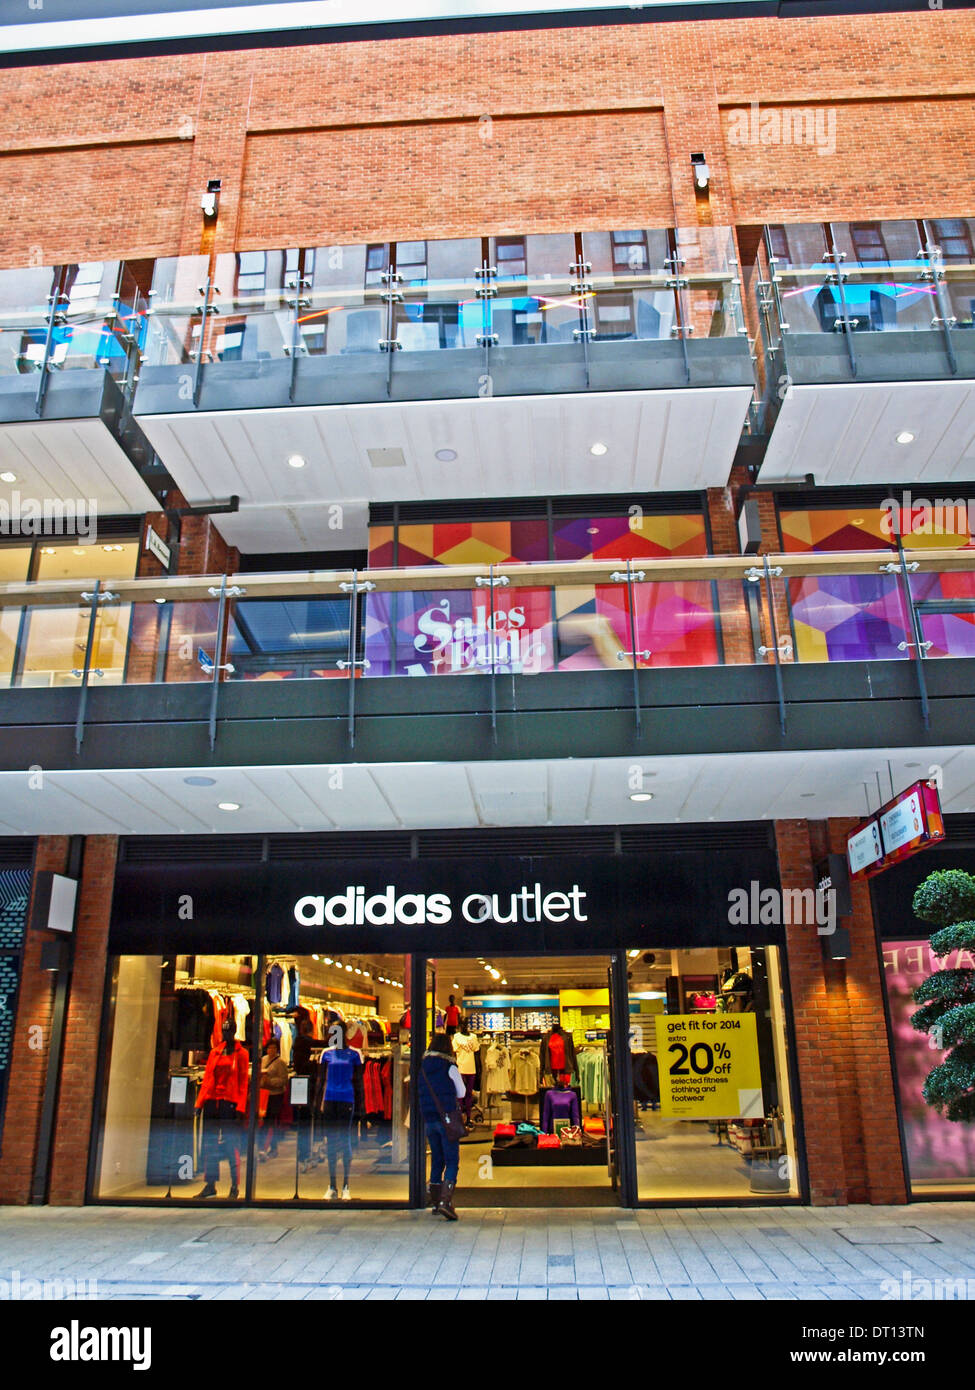 Adidas Outlet at the London Designer Outlet, Wembley, London Borough of  Brent, London, England, United Kingdom Stock Photo - Alamy